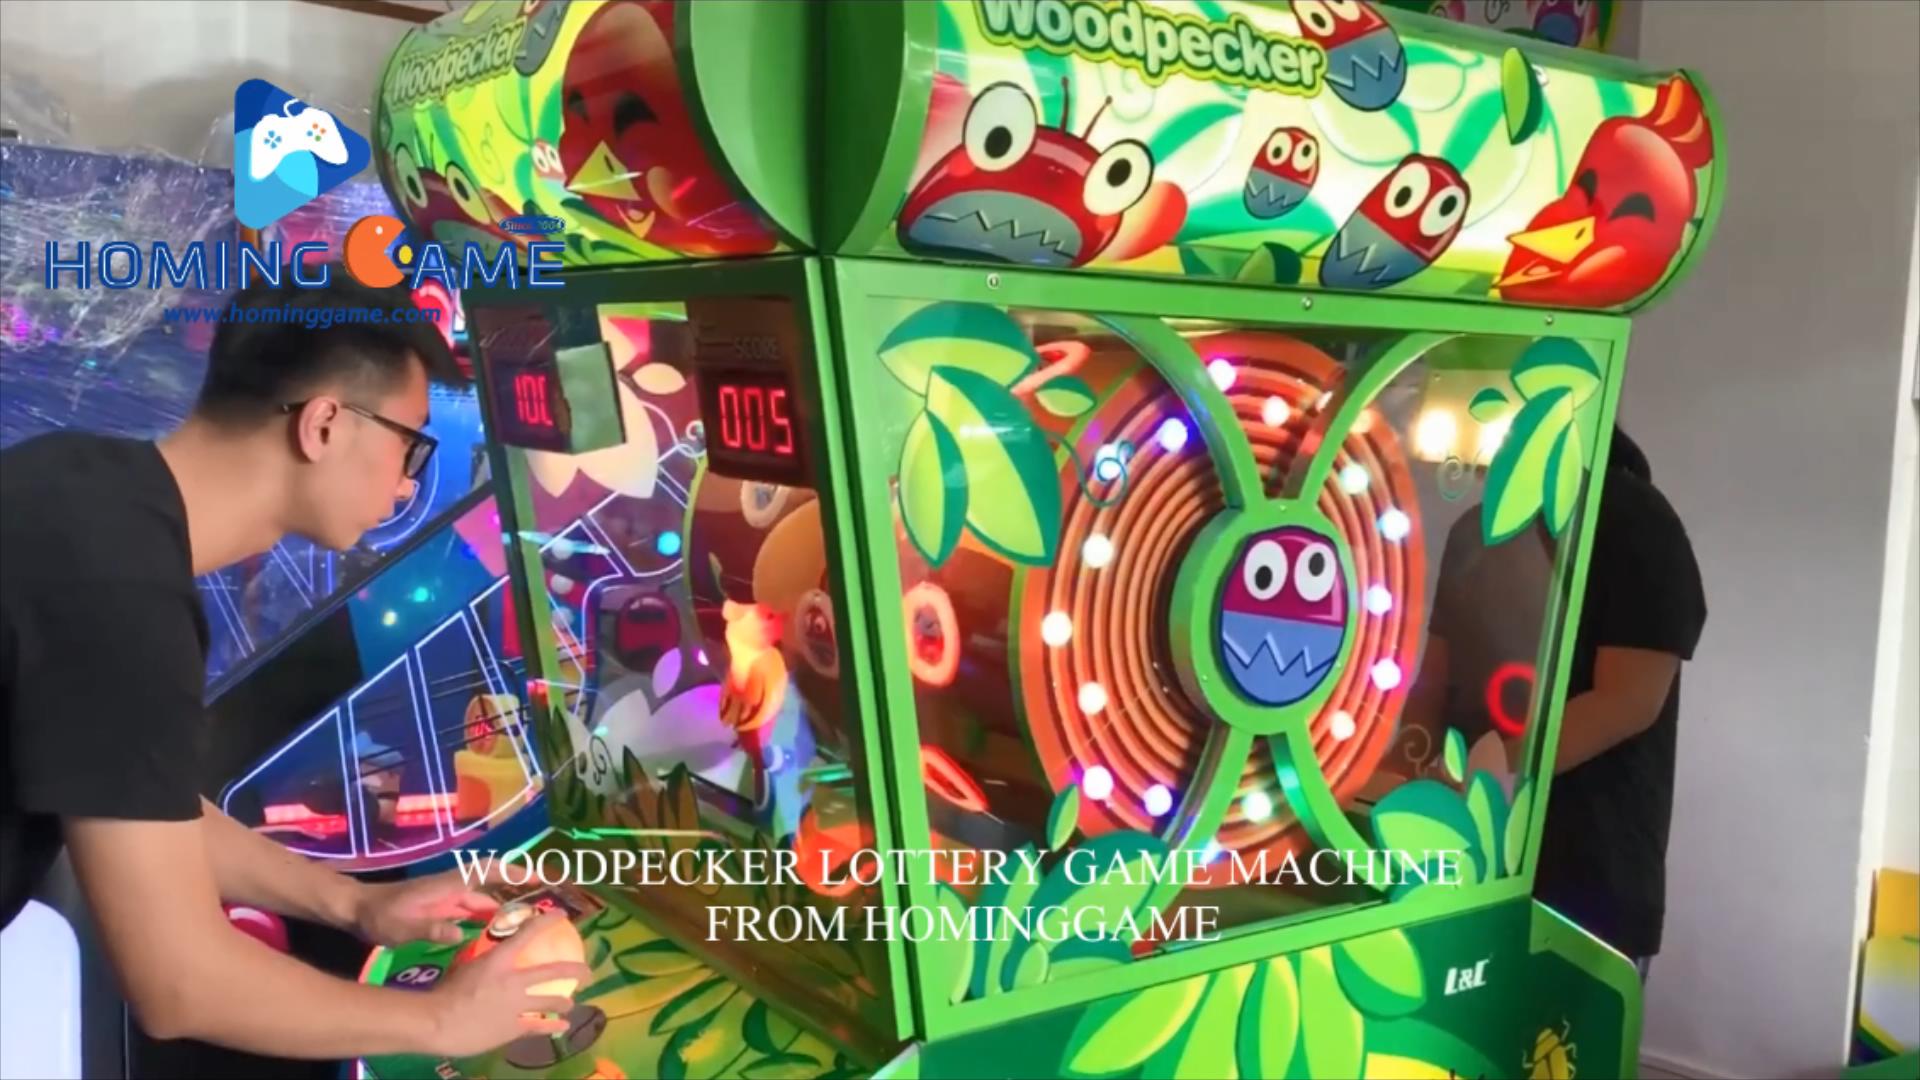 2020 December HomingGame New Released Coin Operated Lottery Game WoodPecker Redemption Game Machine(Order Call Whatsapp:+8618688409495),woodpecker lottery game machine,woodpecker redemption game machine,redemption game machine,lottery game machine,kids game machine,lottery redemption game machine,kids lottery game machine,game machine,arcade game machine,coin operated game machine,indoor game machine,electrical game machine,amsuement park game equipment,game equipment,amusement machine,hominggame,www.gametube.hk